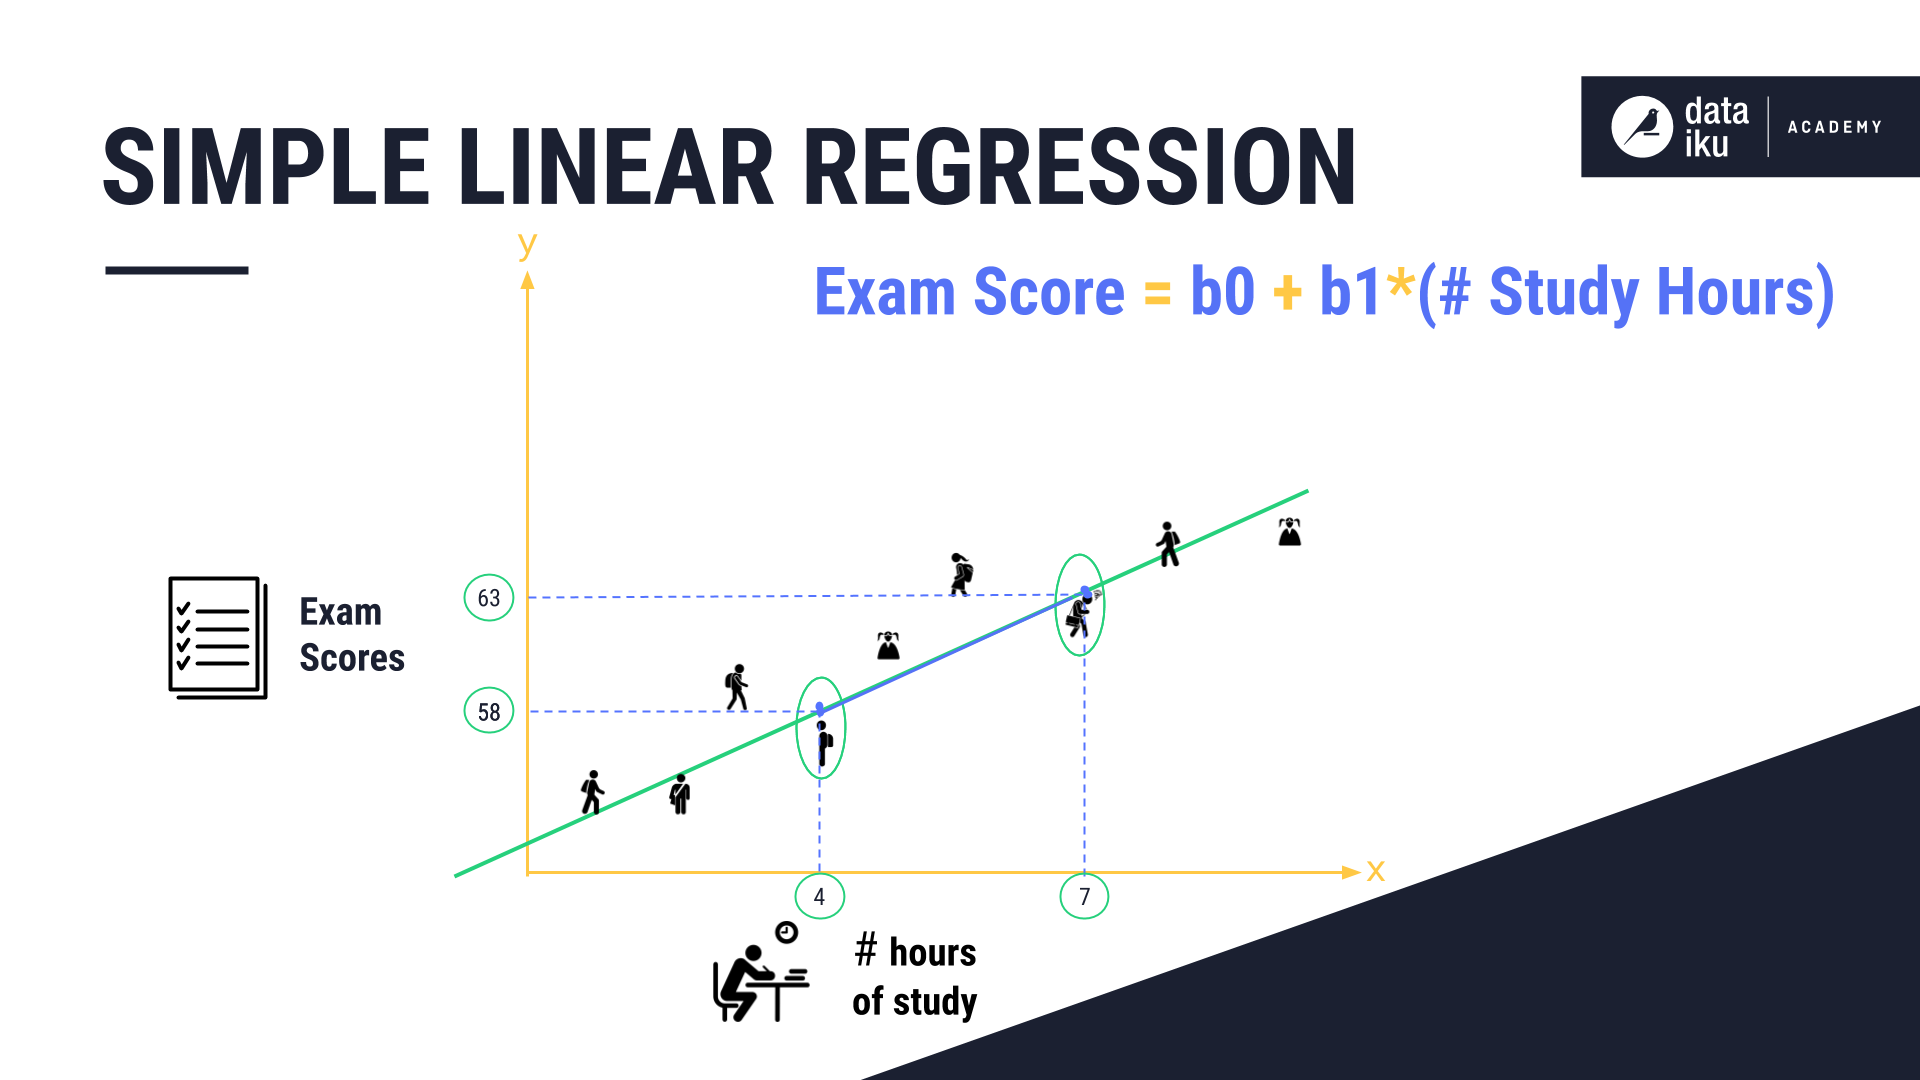 ../../_images/simple-linear-regression2.png